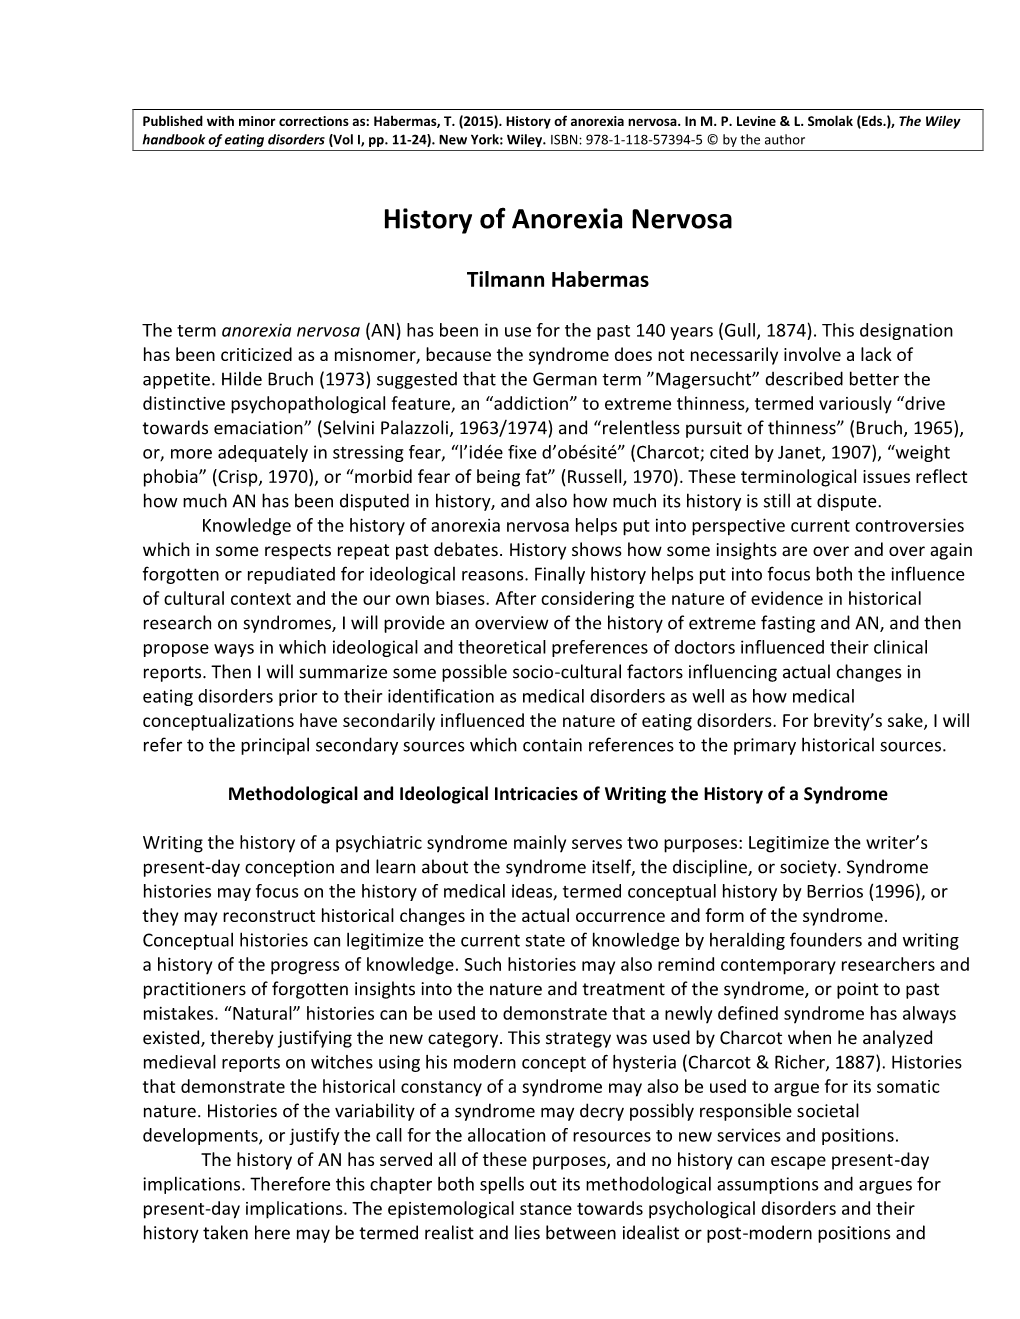 History of Anorexia Nervosa